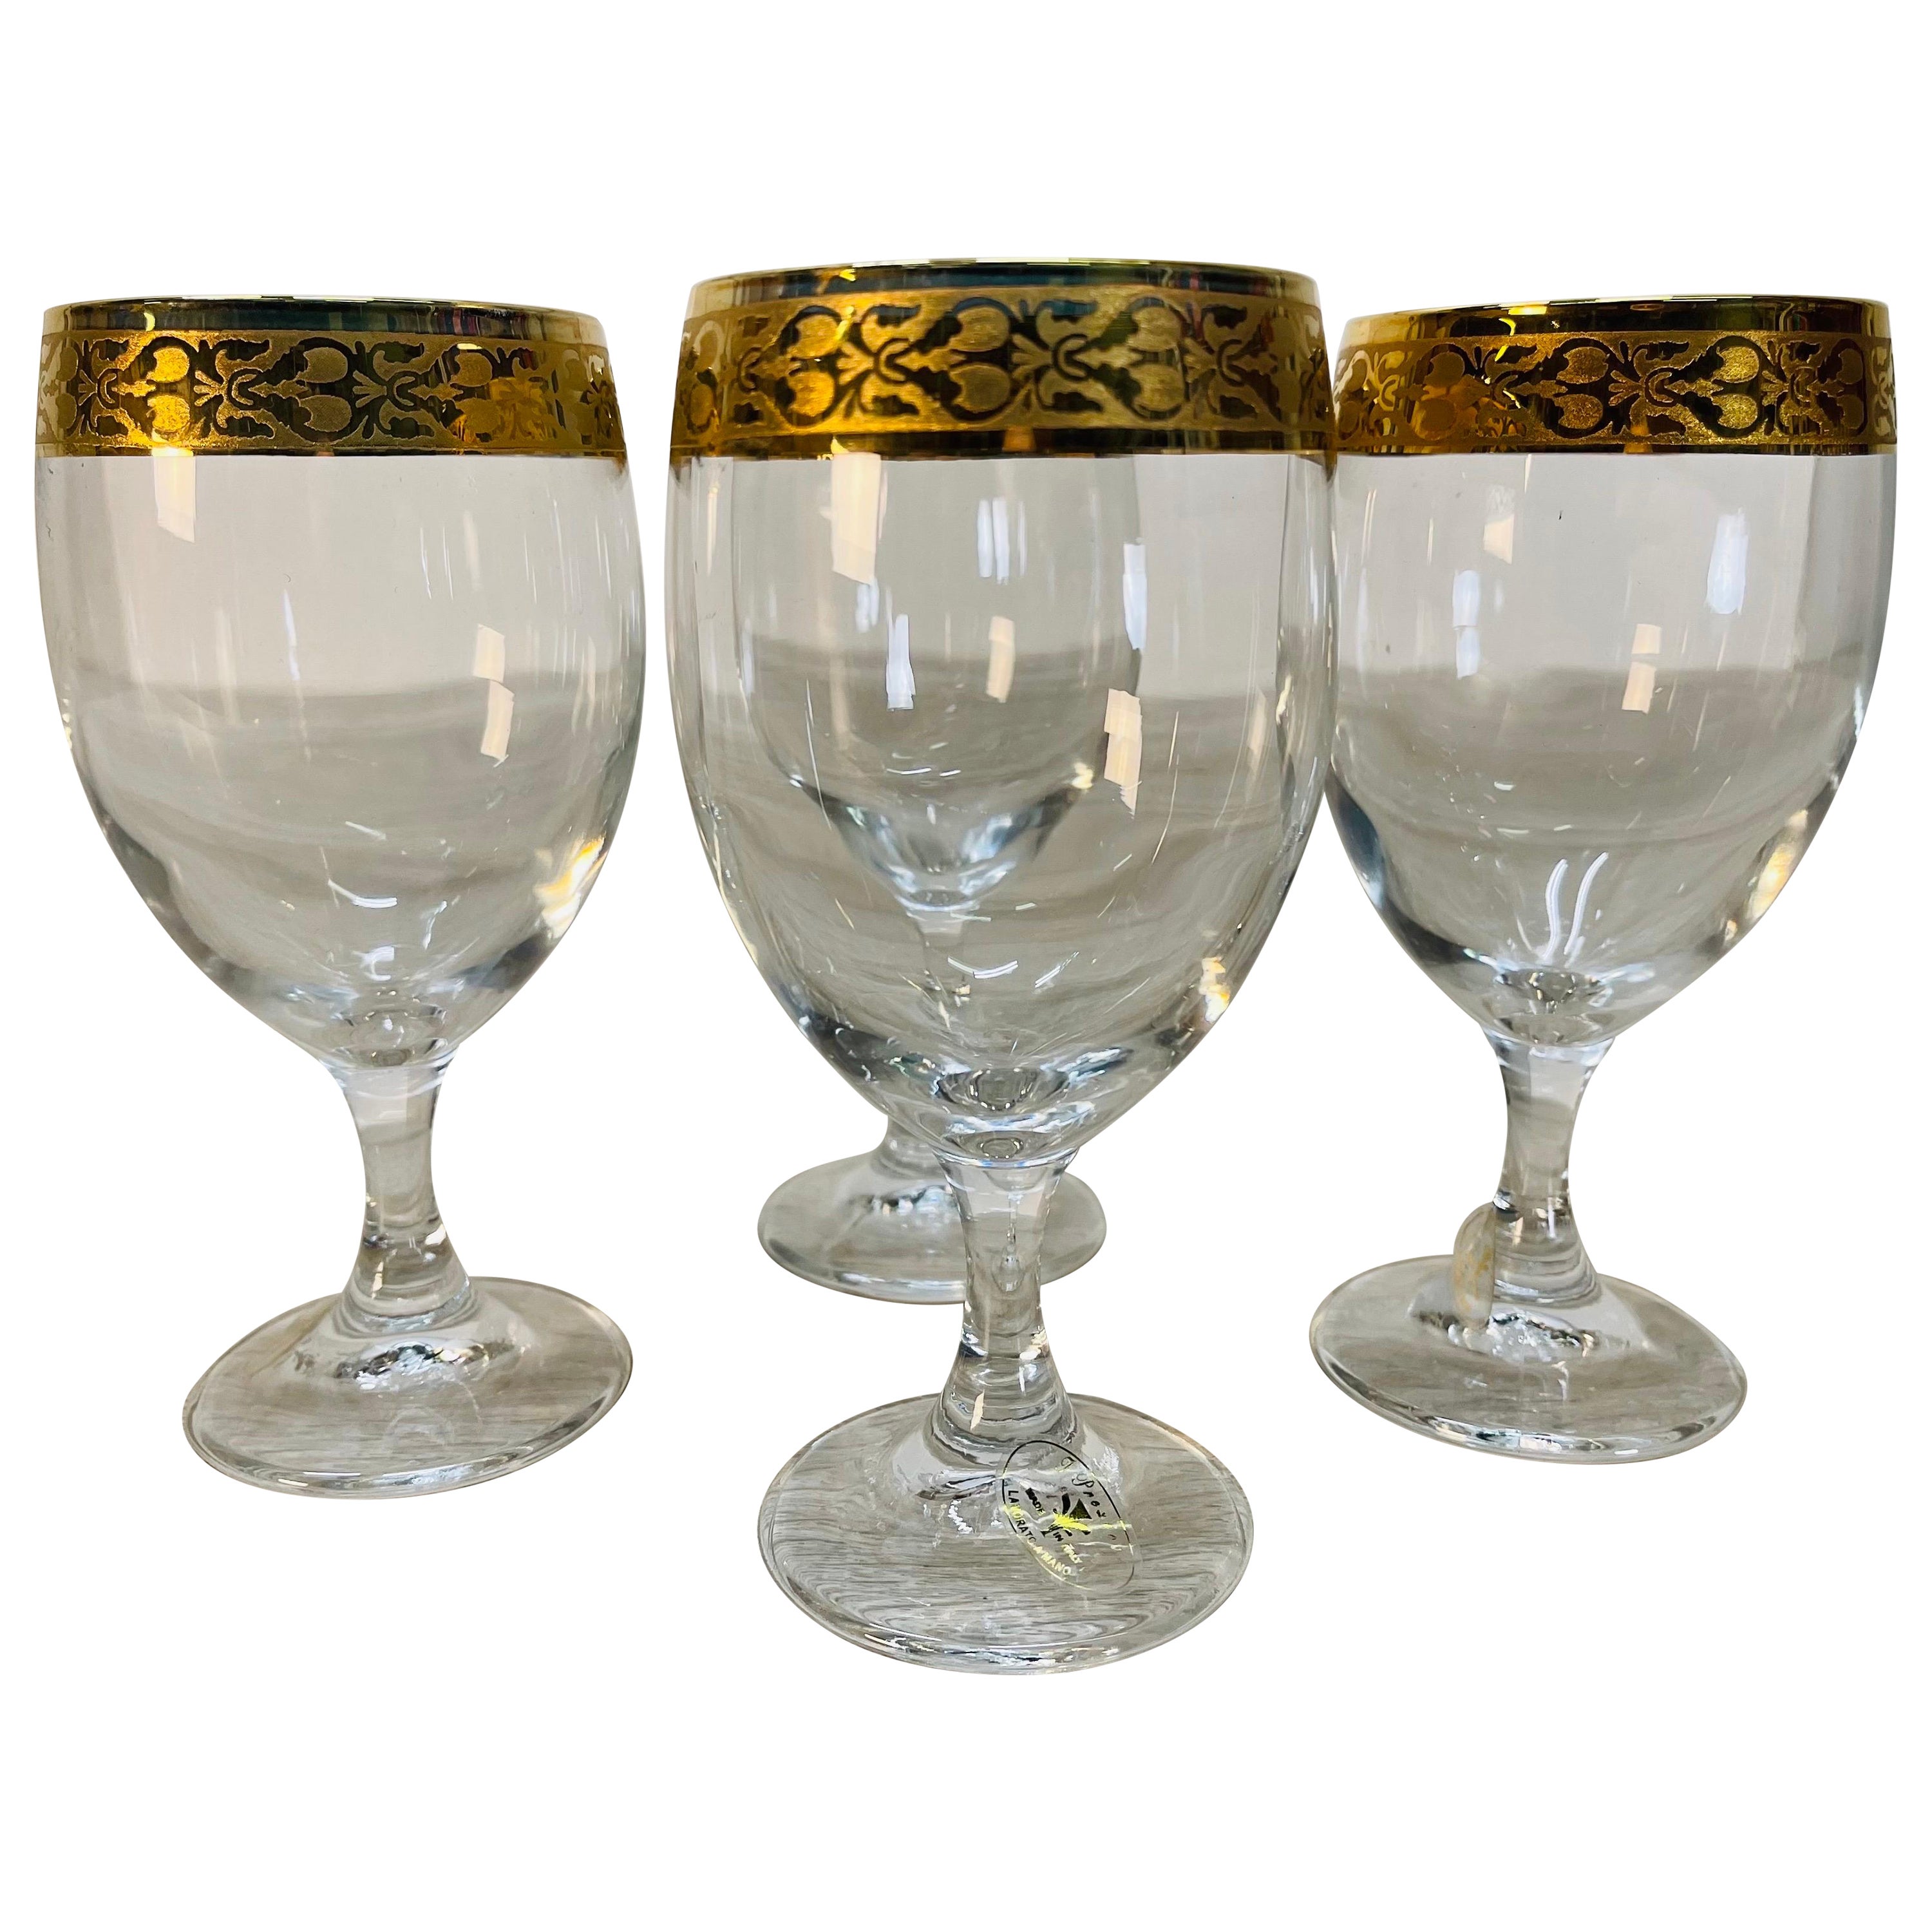 Louis Vuitton inspired wine glass set of four